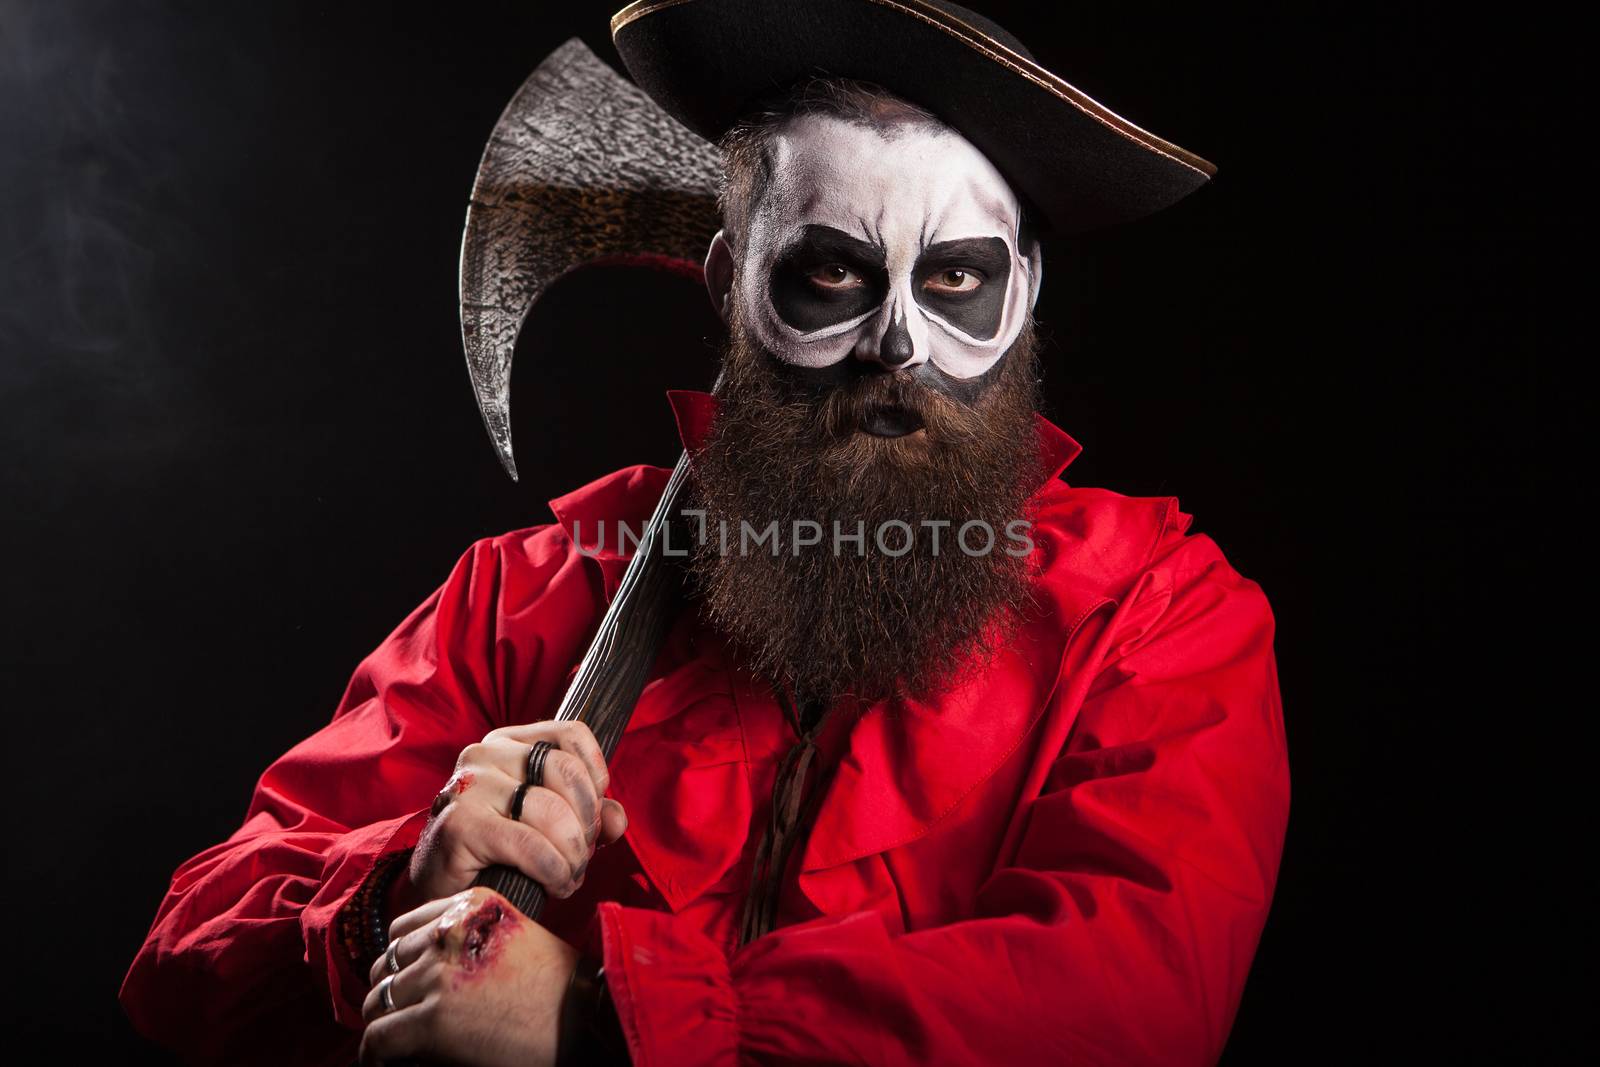 Medieval captain holding an axe over black background by DCStudio